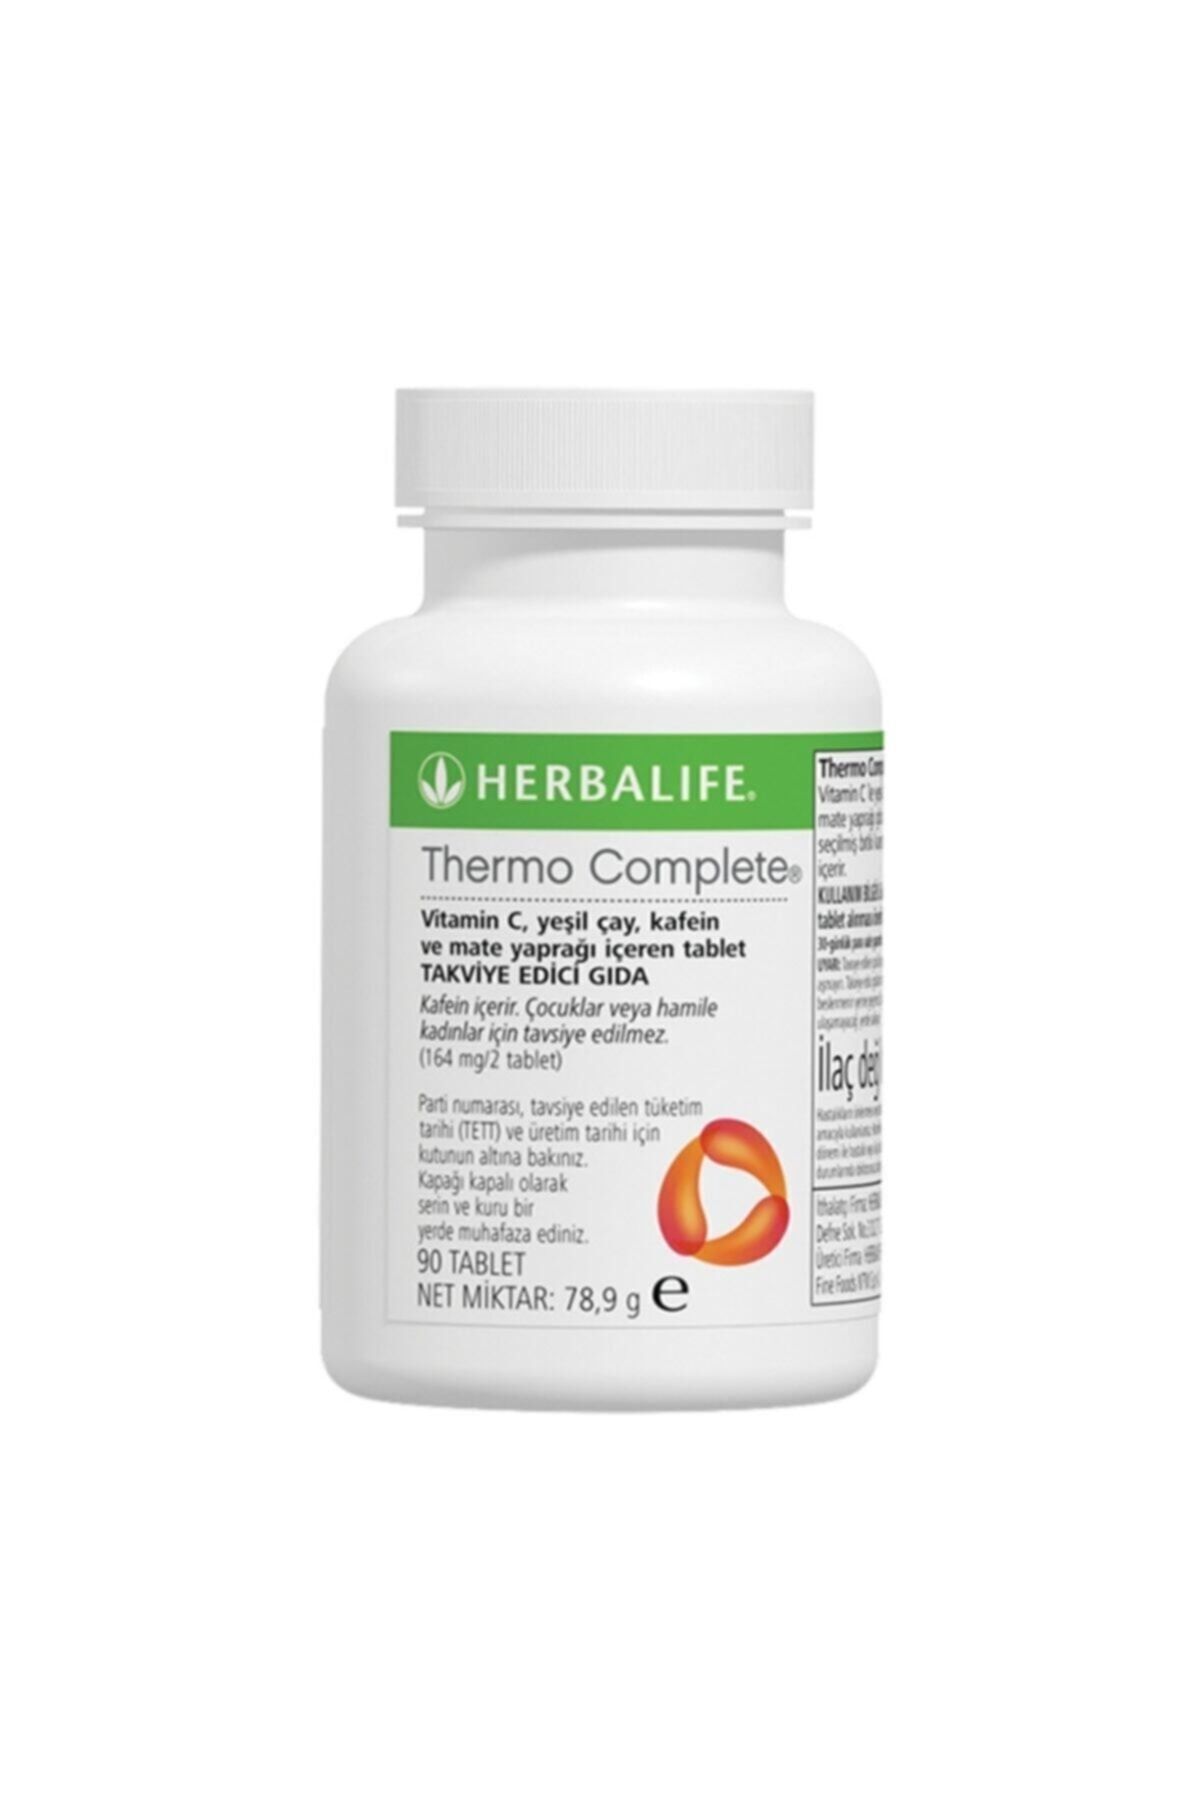 Herbalife Thermo